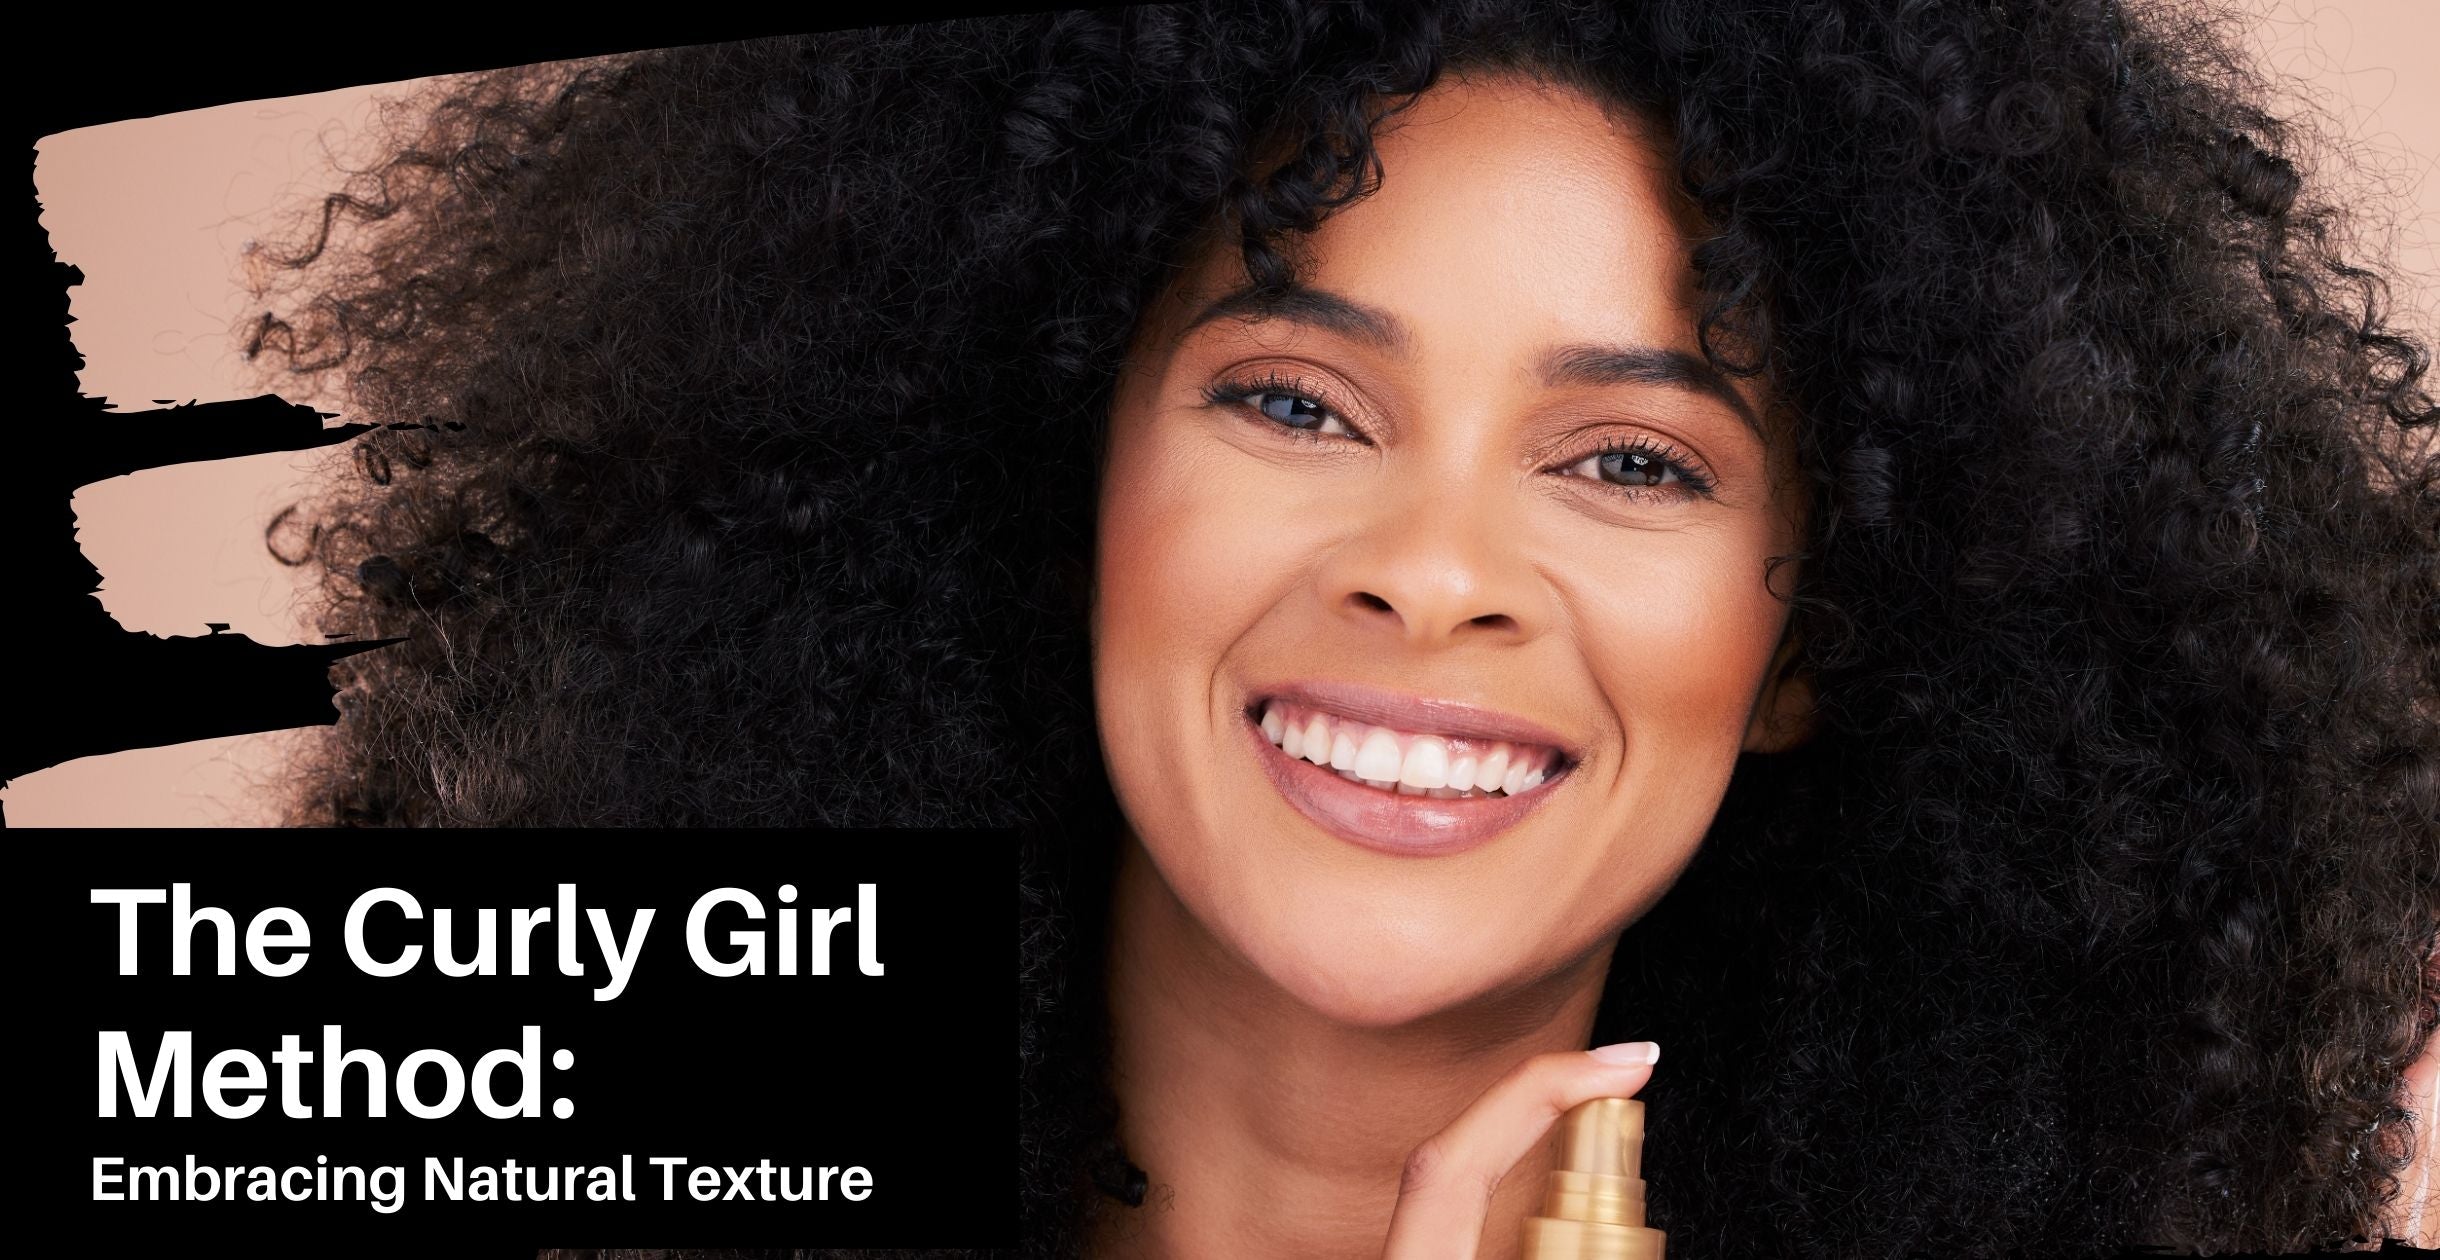 The Curly Girl Method: Embracing Natural Texture